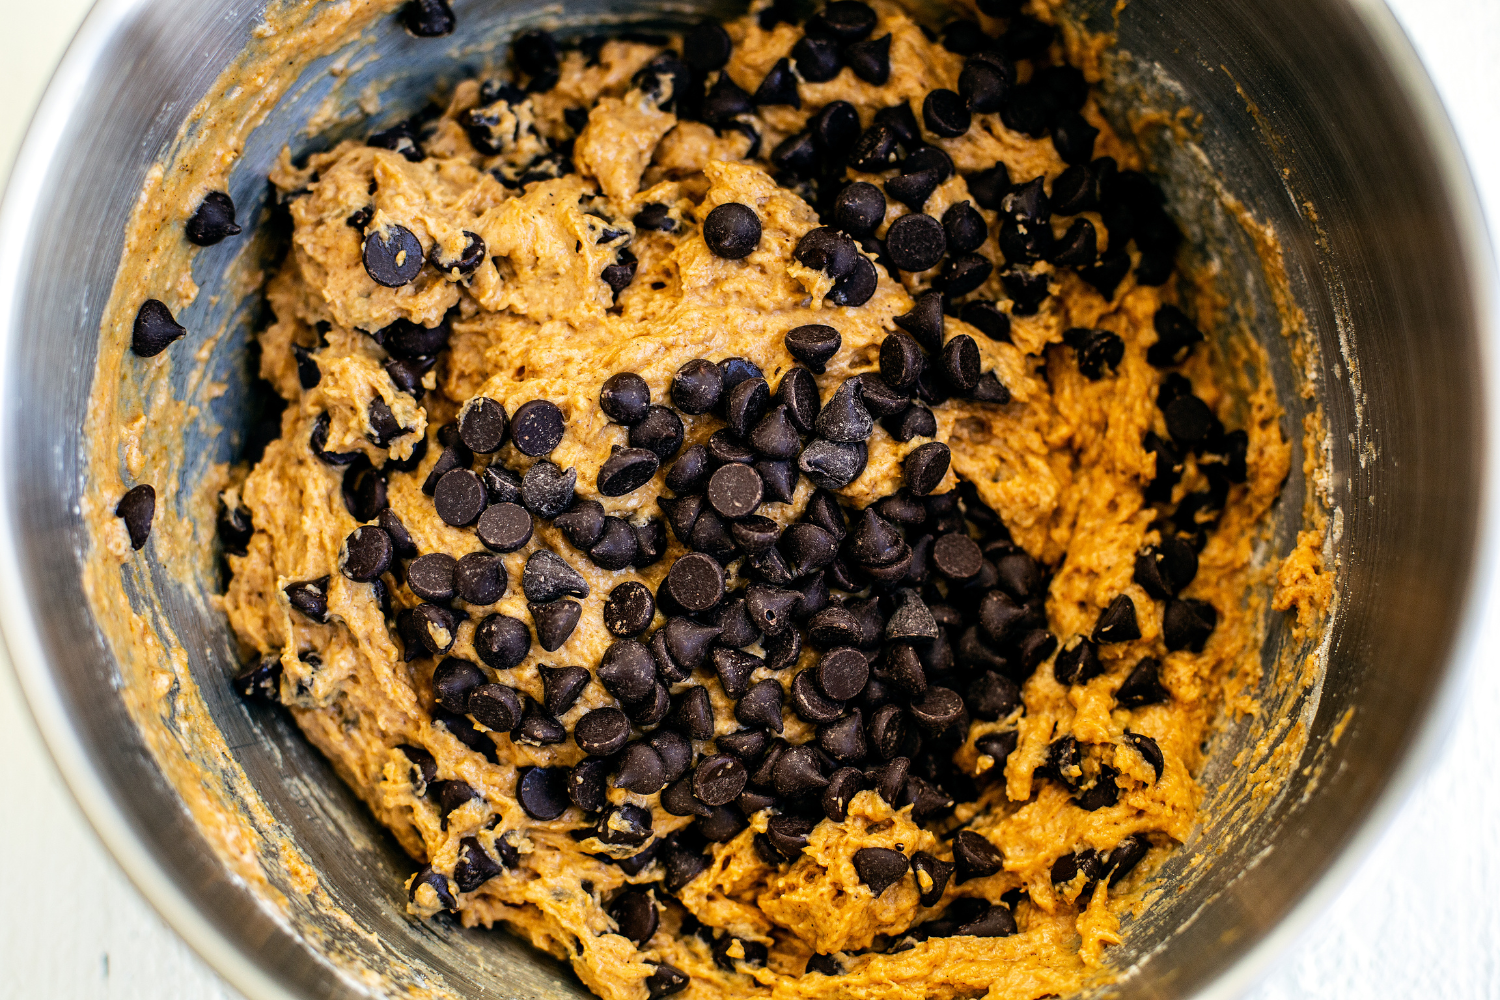 Pumpkin Chocolate Chip Muffins batter, ready to portion out and bake